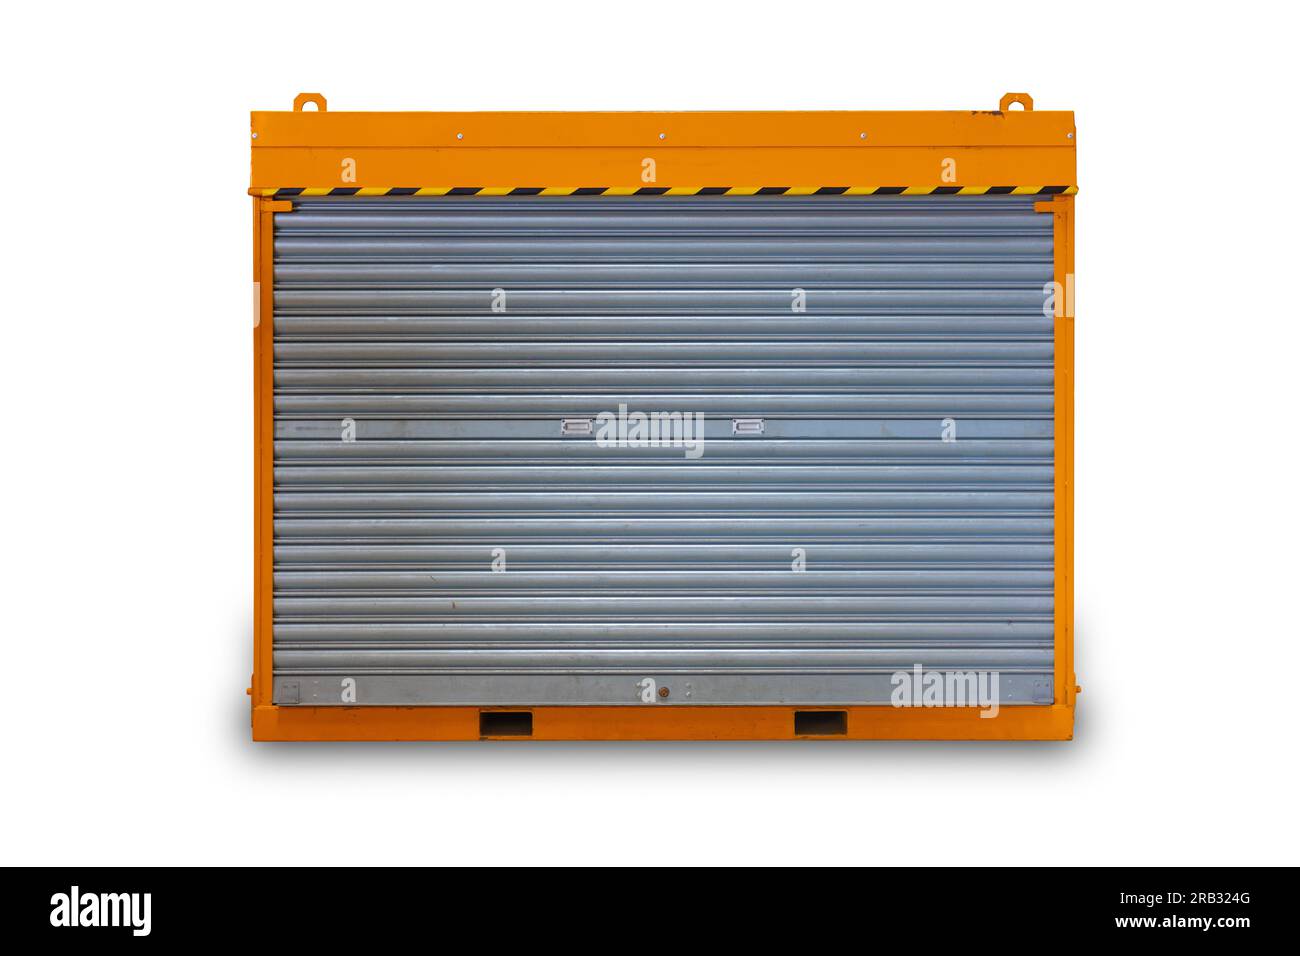 Industrial Equipments Tools Cabinet storage locker roller shutter door isolated on white background Stock Photo